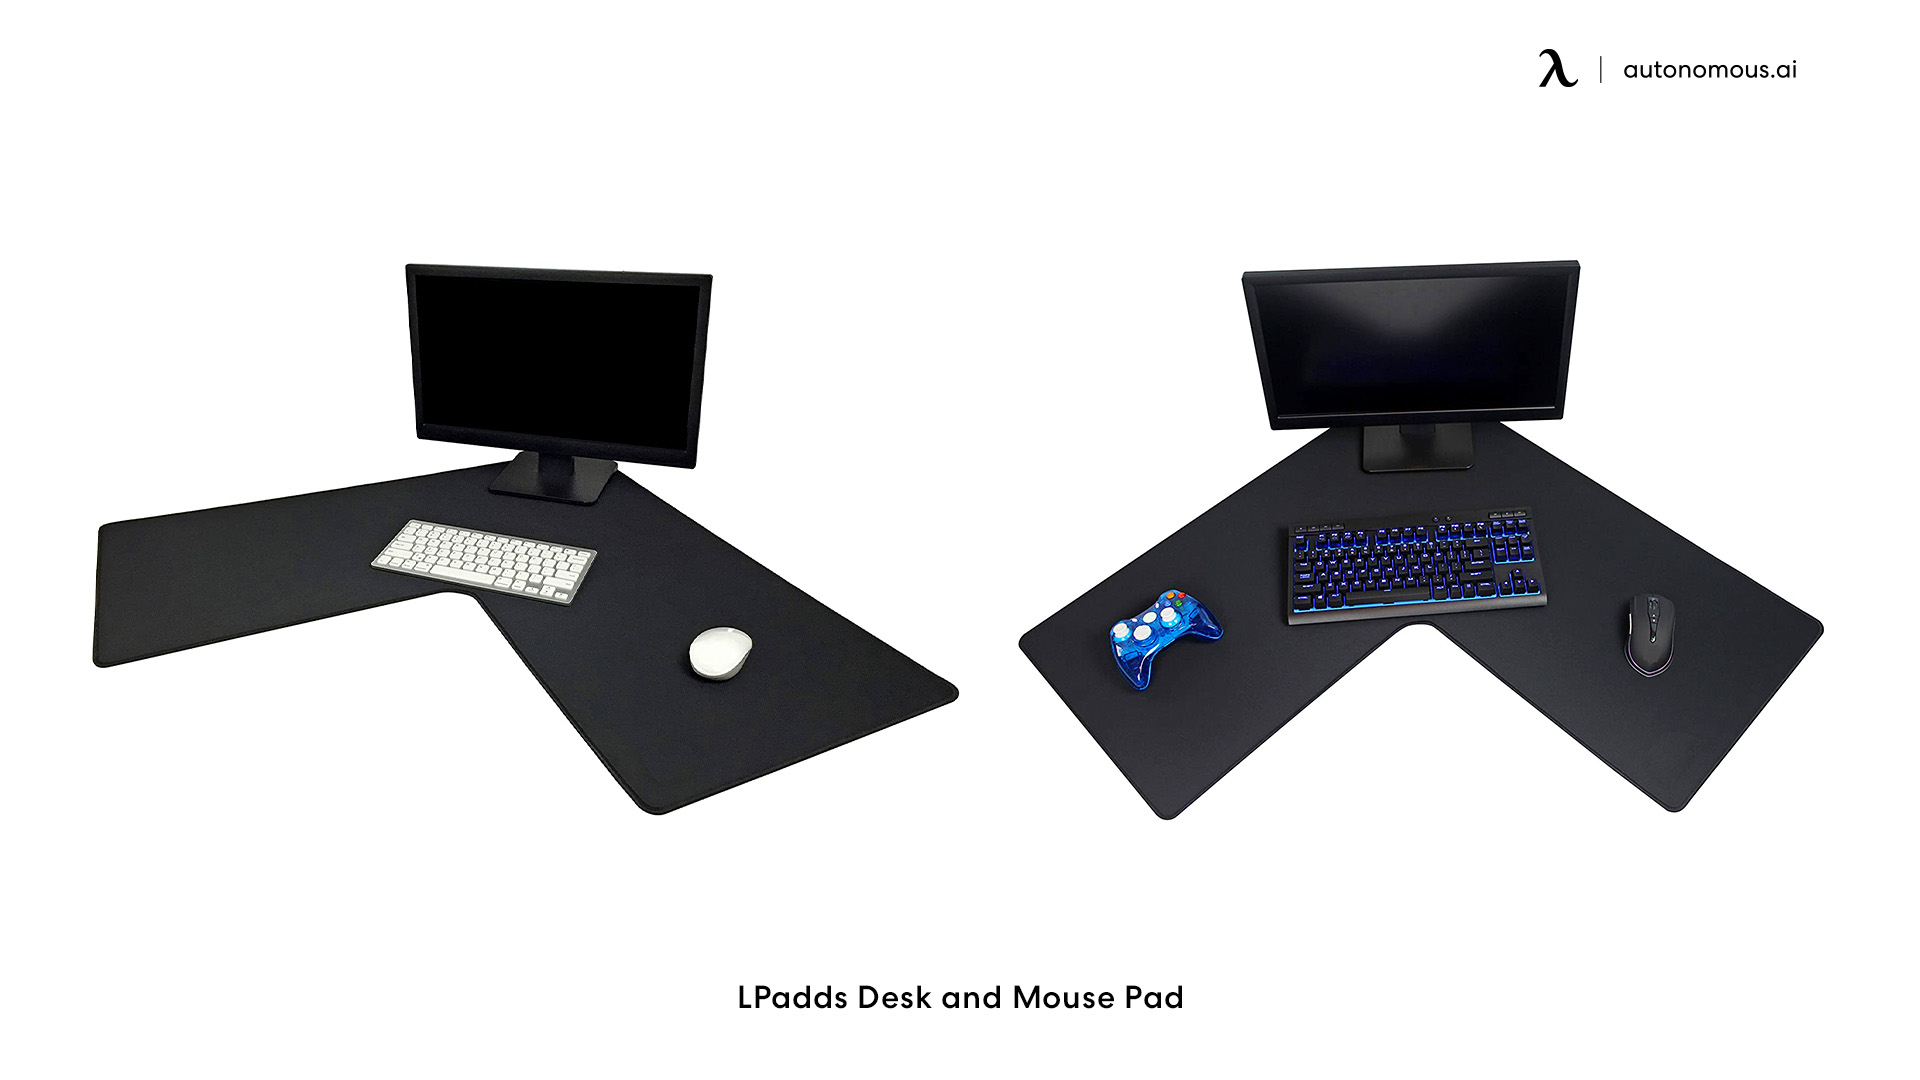 LPadds Desk and Mouse Pad